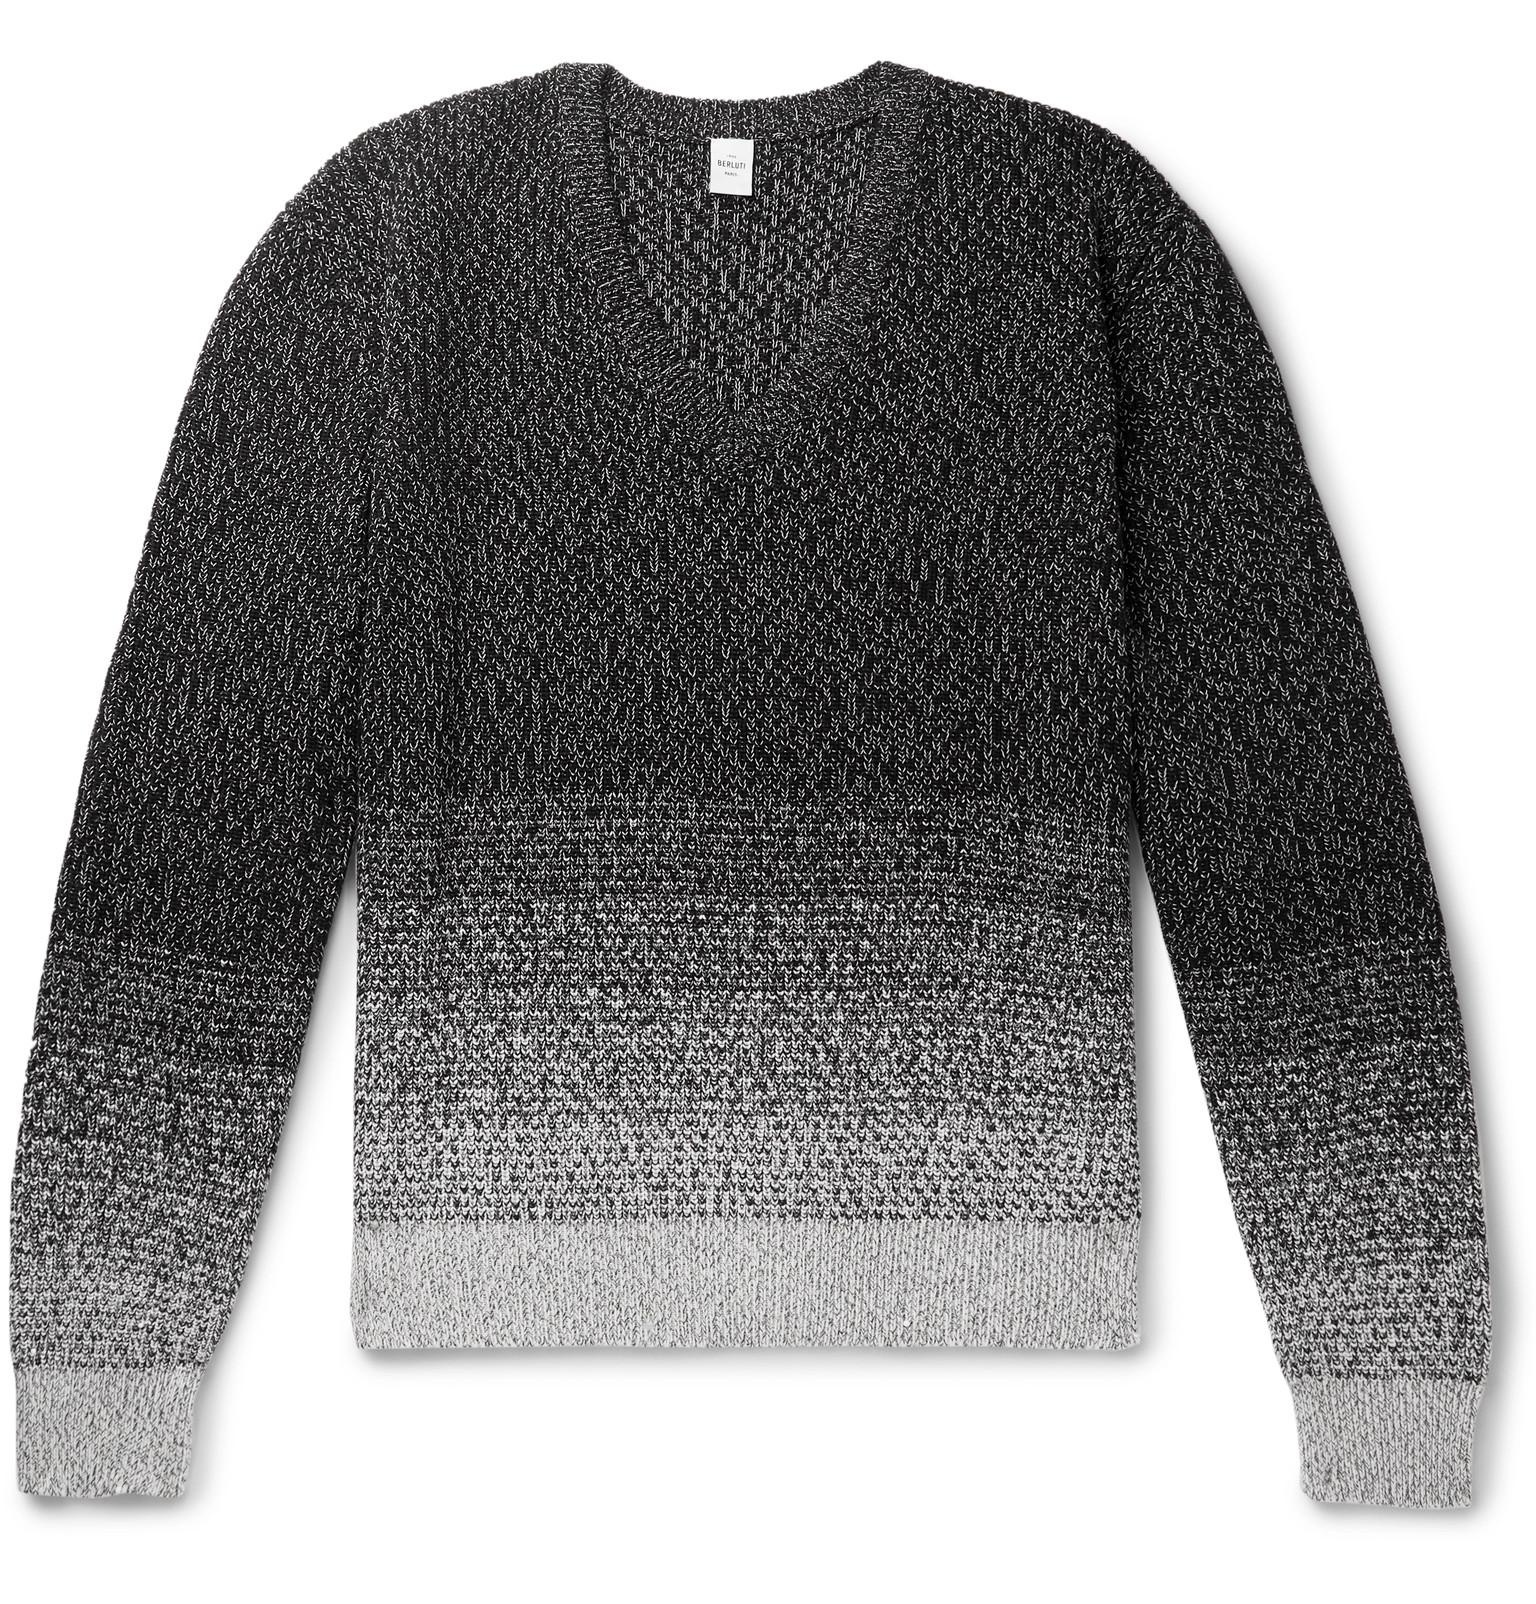 Berluti Cotton And Mulberry Silk-blend Sweater in Black for Men - Save ...